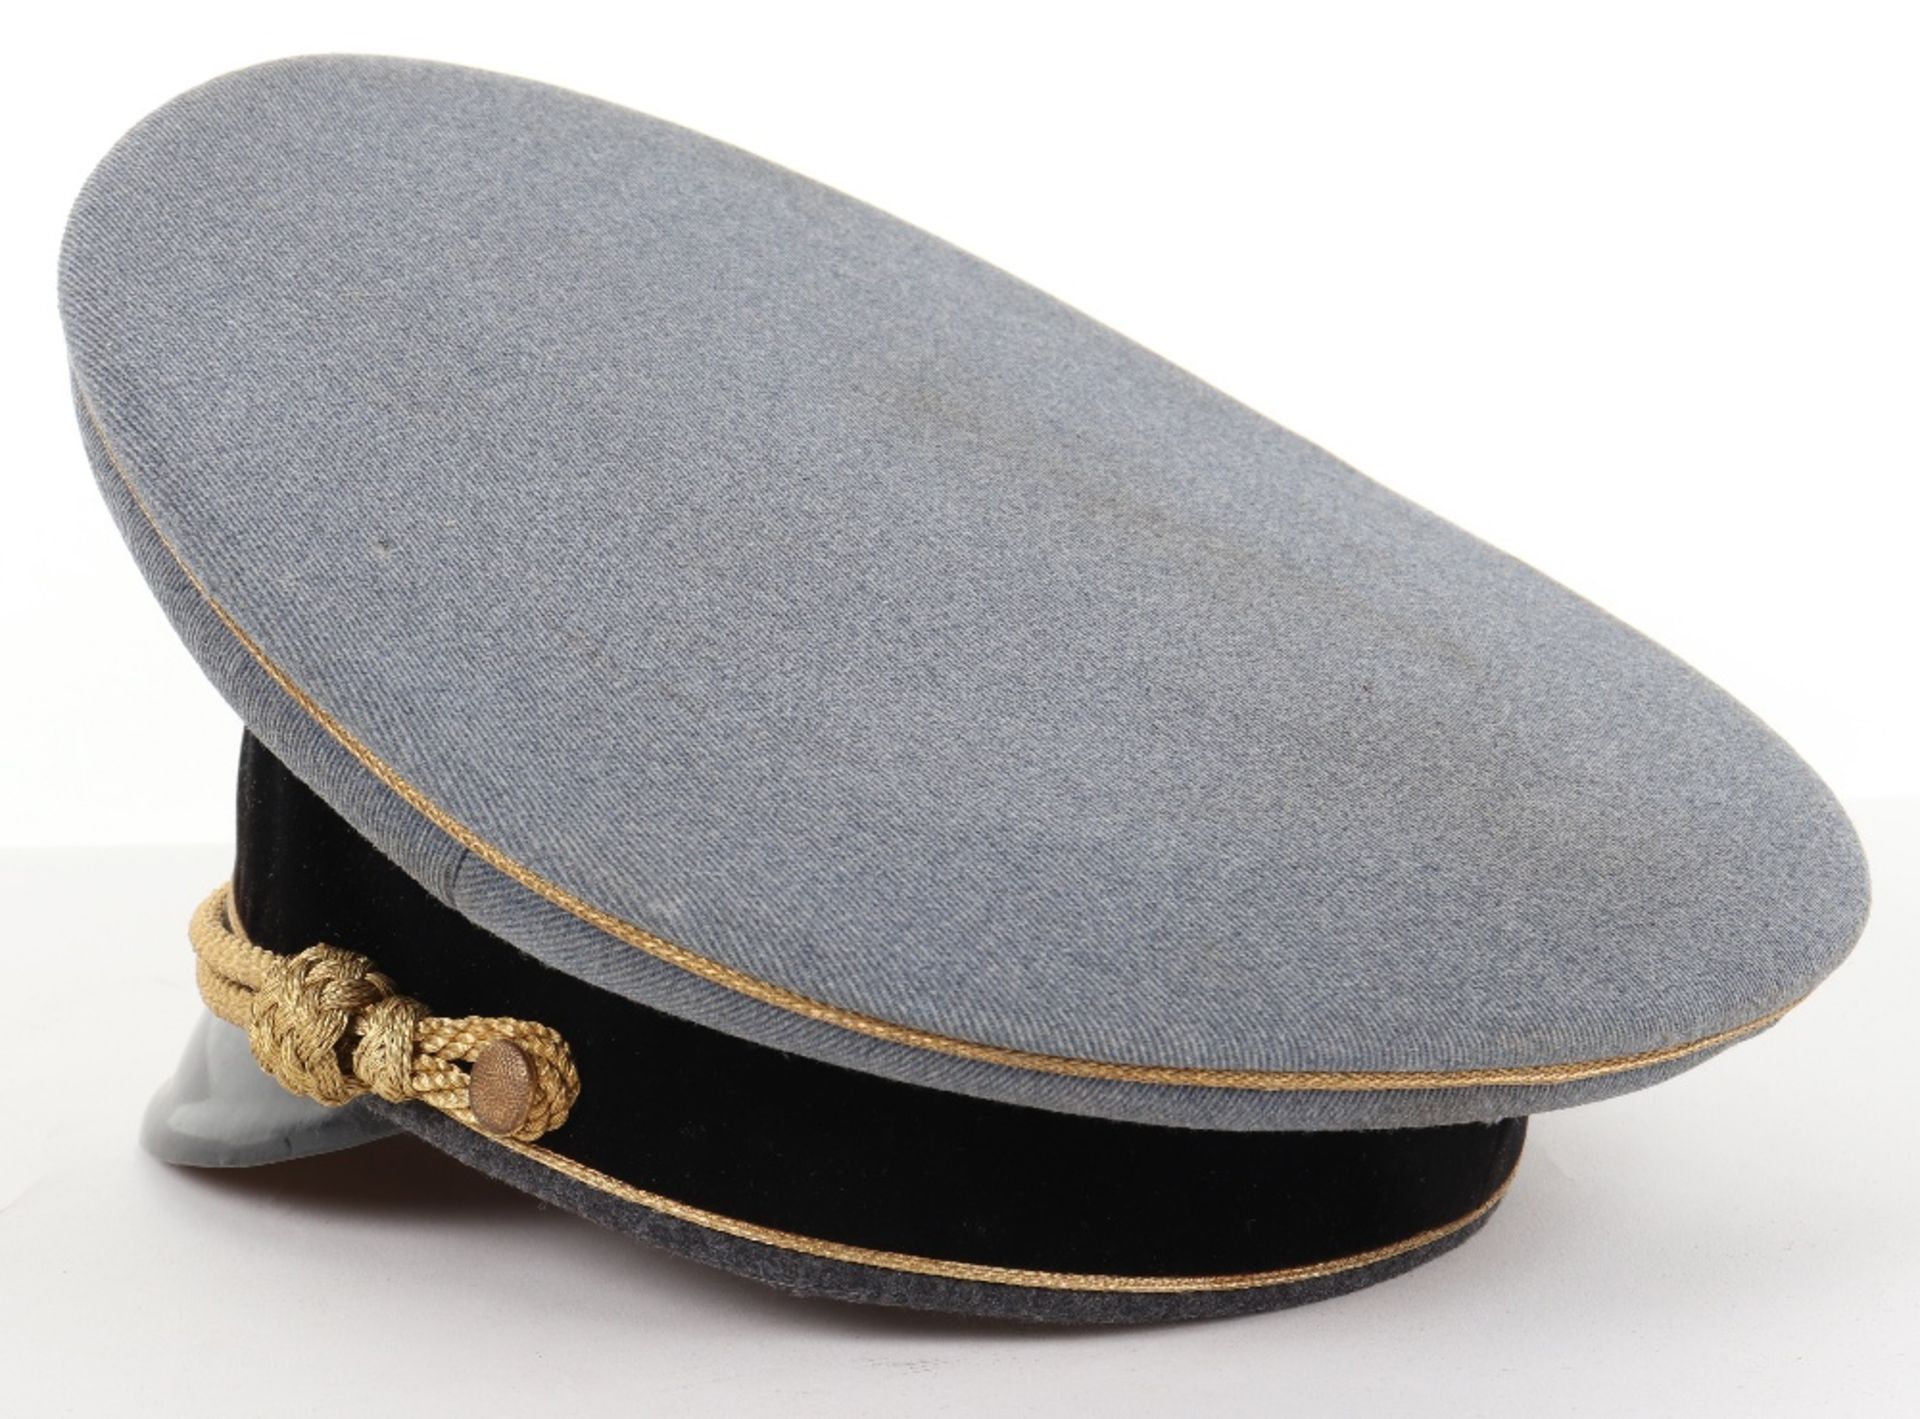 Third Reich Bahnschutz Leaders Peaked Cap - Image 4 of 6